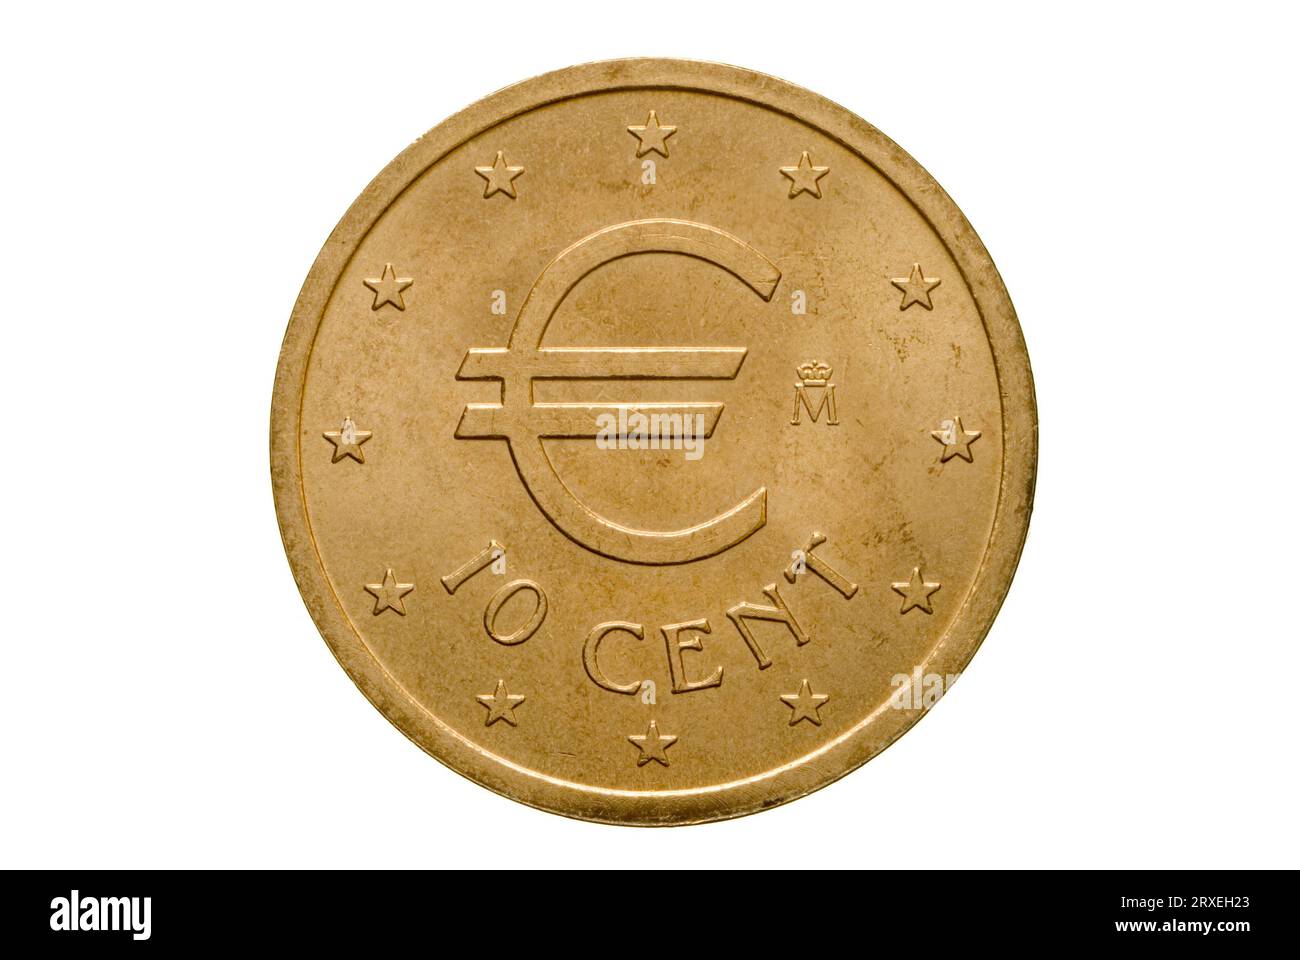 Euro 10 Cent Trail Coin of Spain Stock Photo